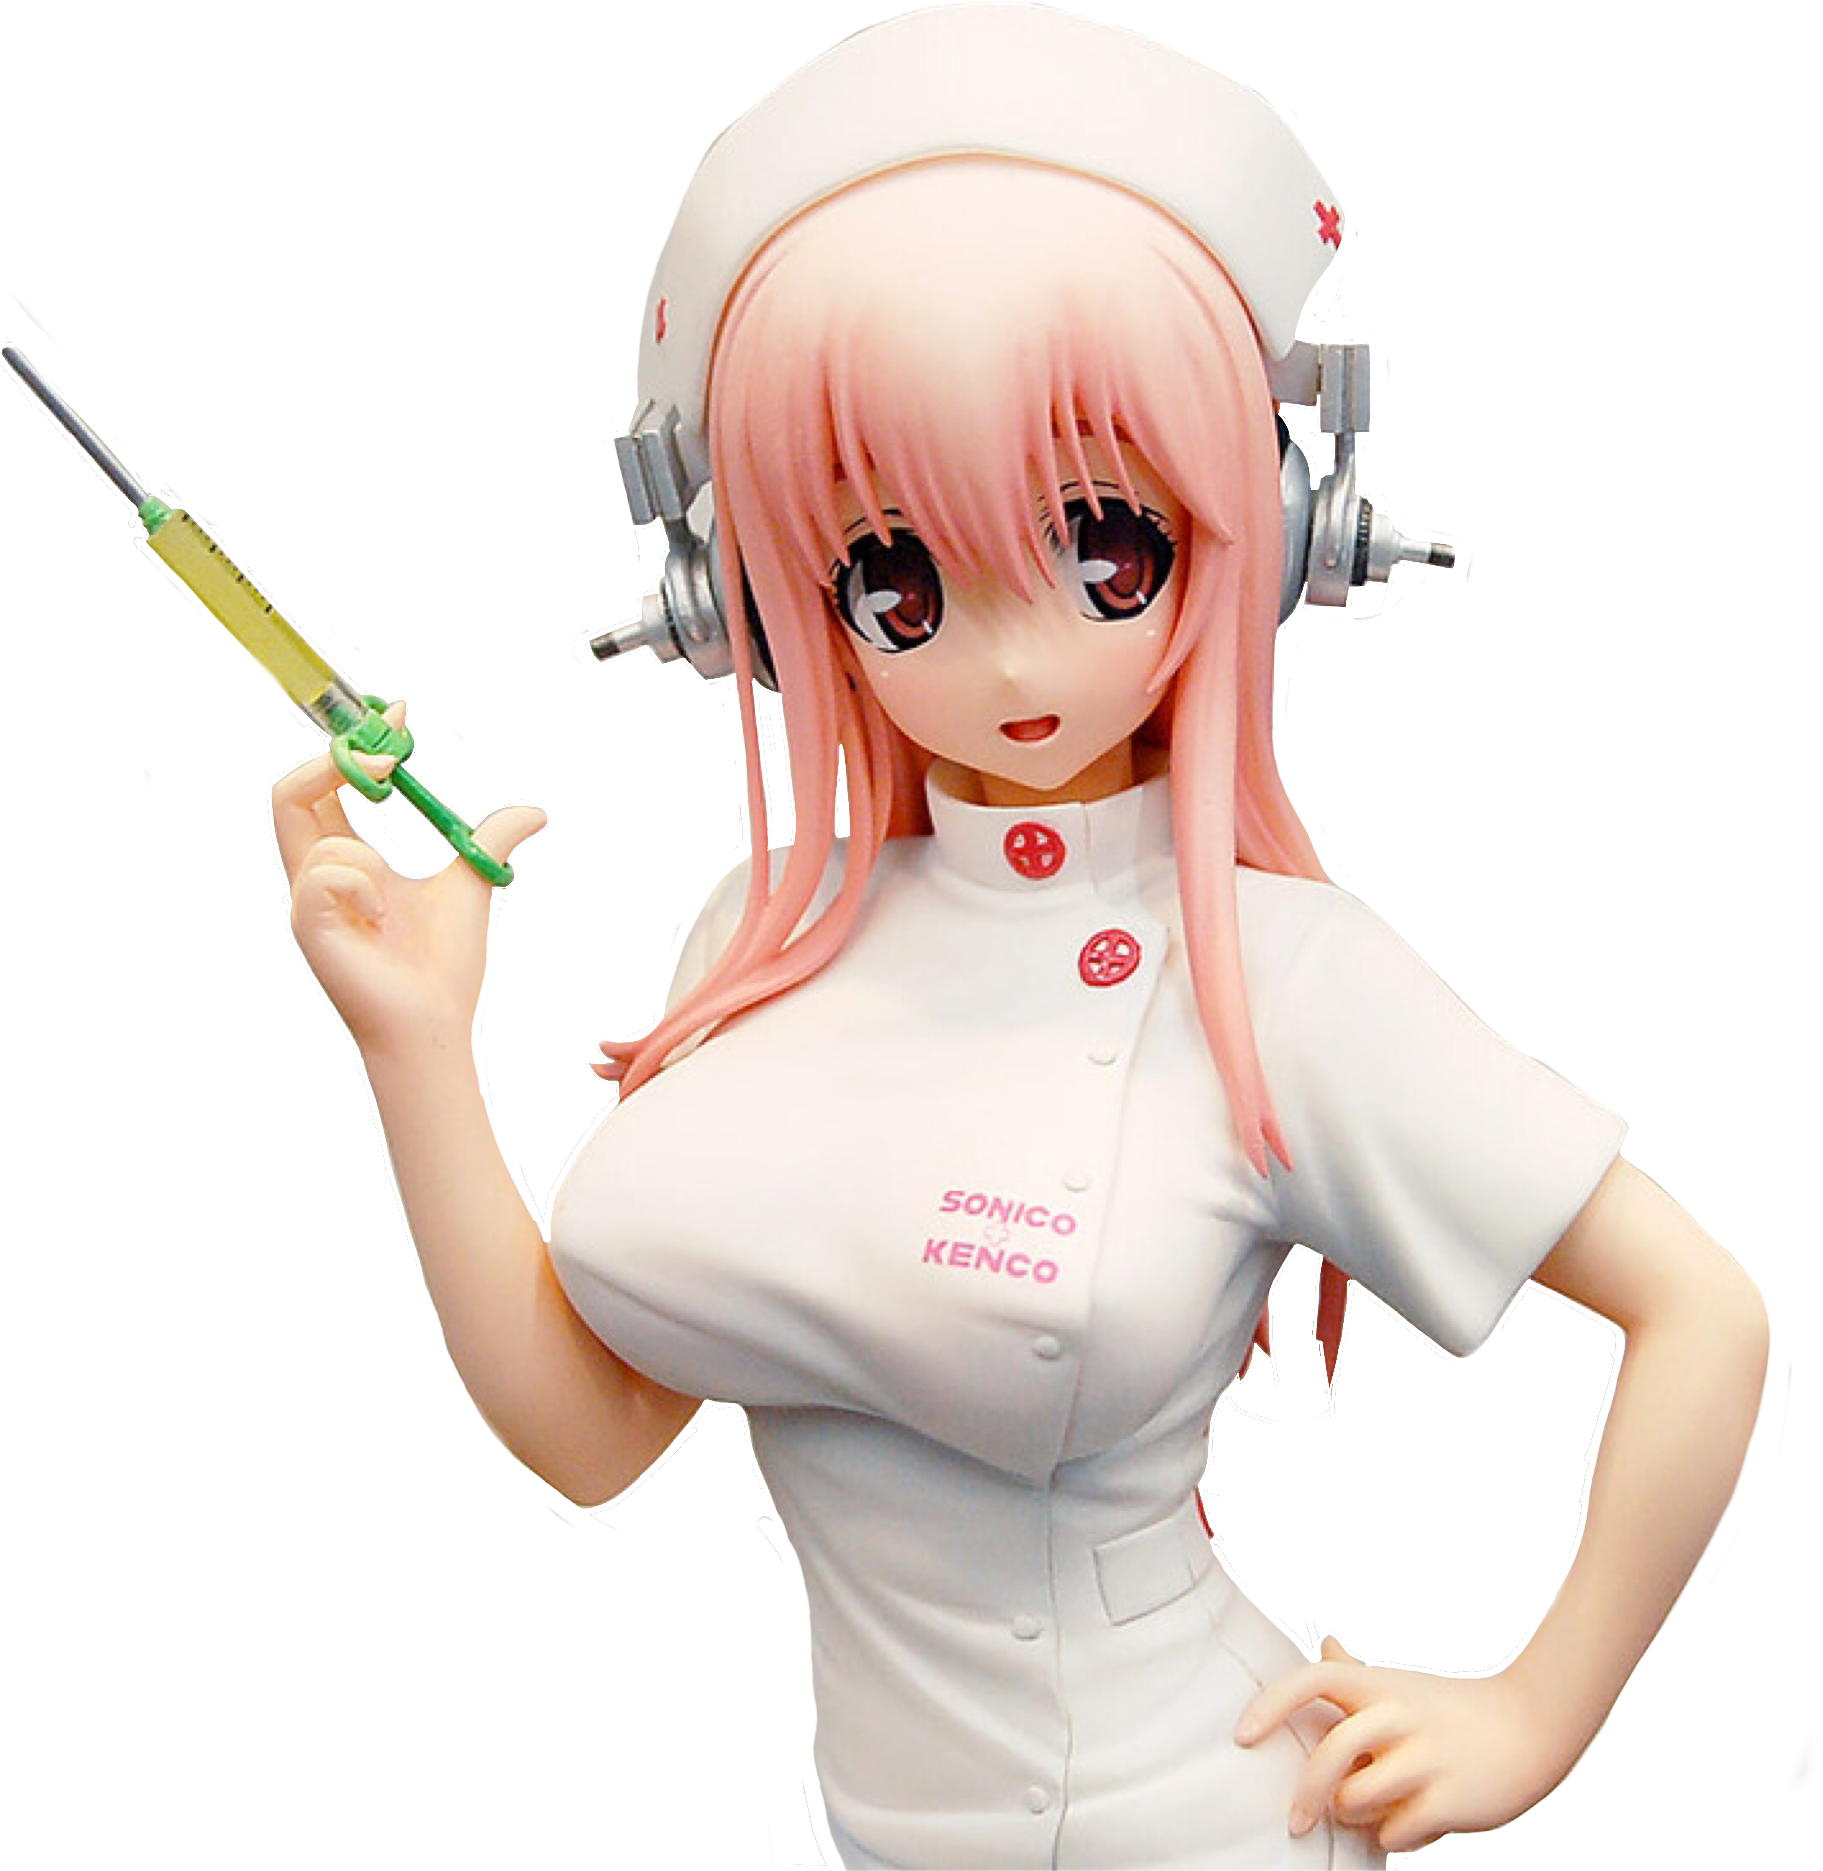 This visual is about supersonic anime animeaesthetic notmine nurse freetoed...